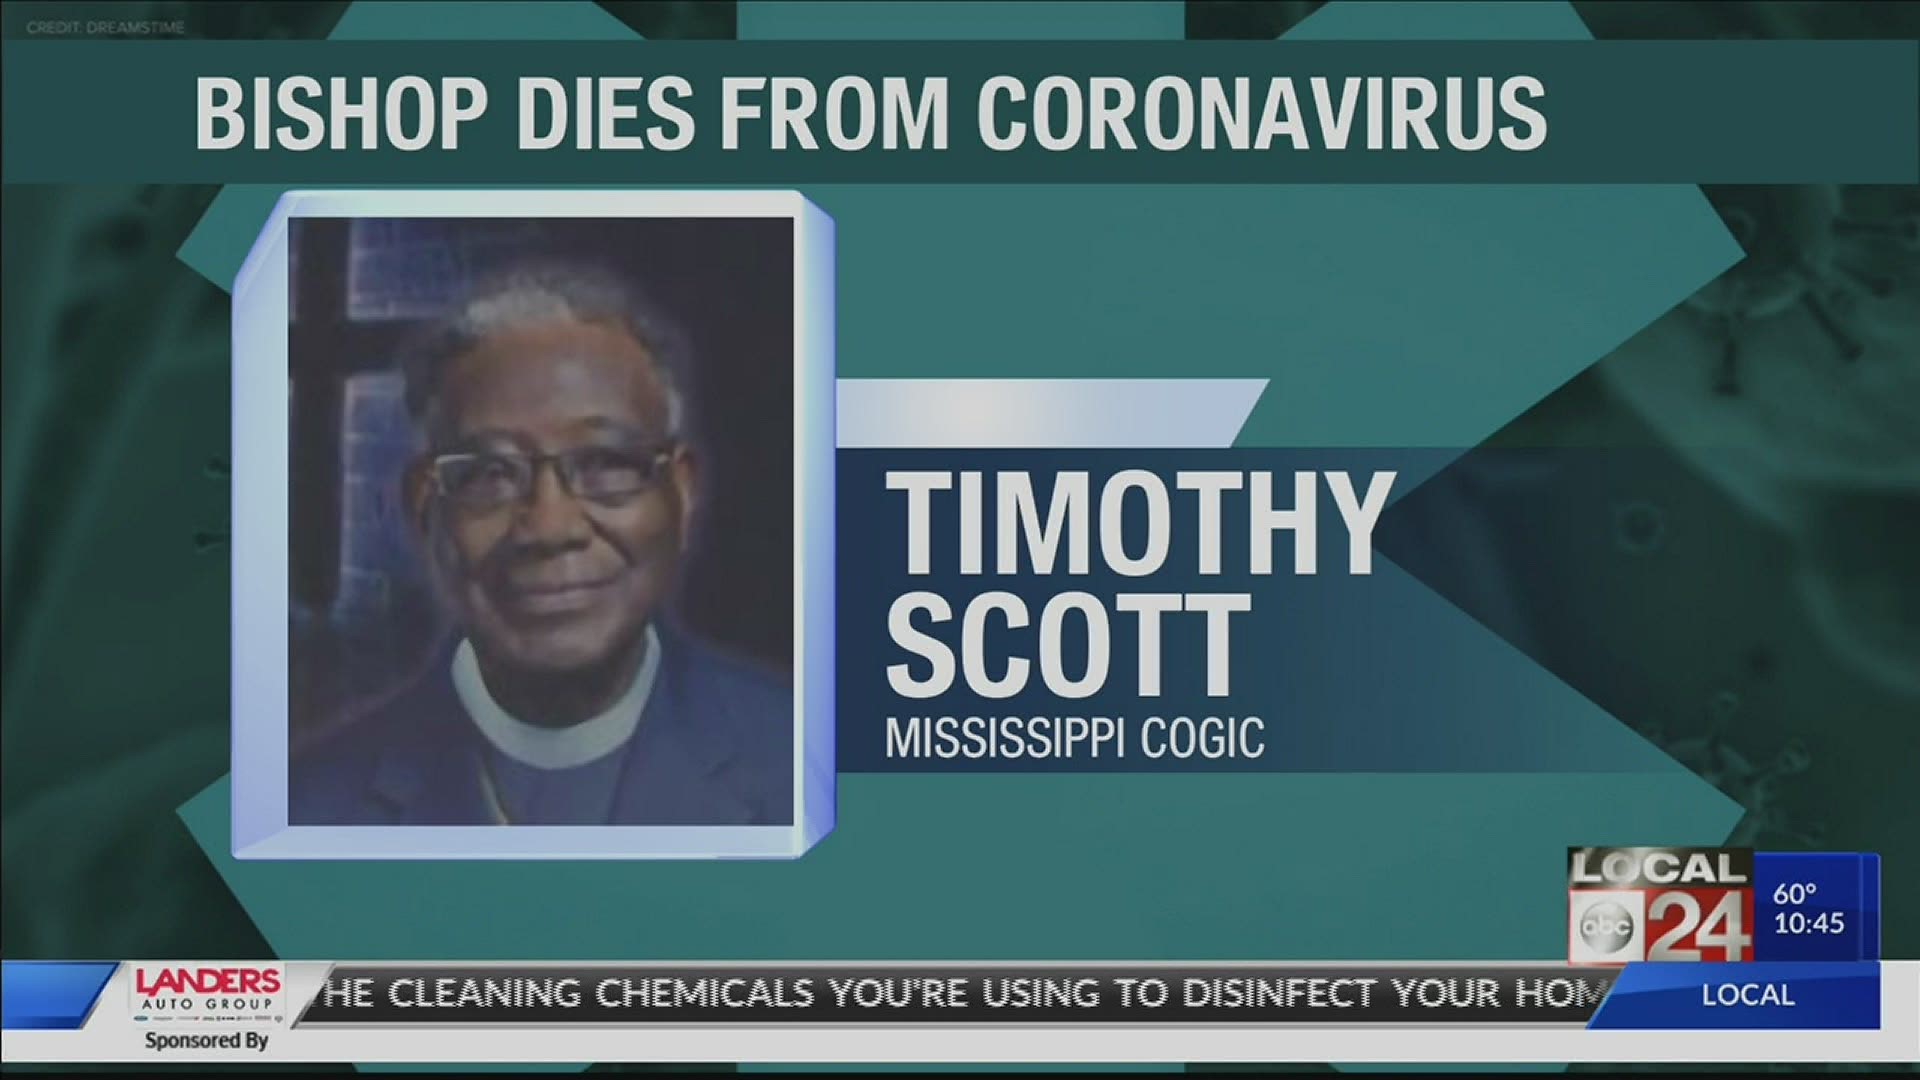 Scott was served as one of the longest bishops in the COGIC organization.